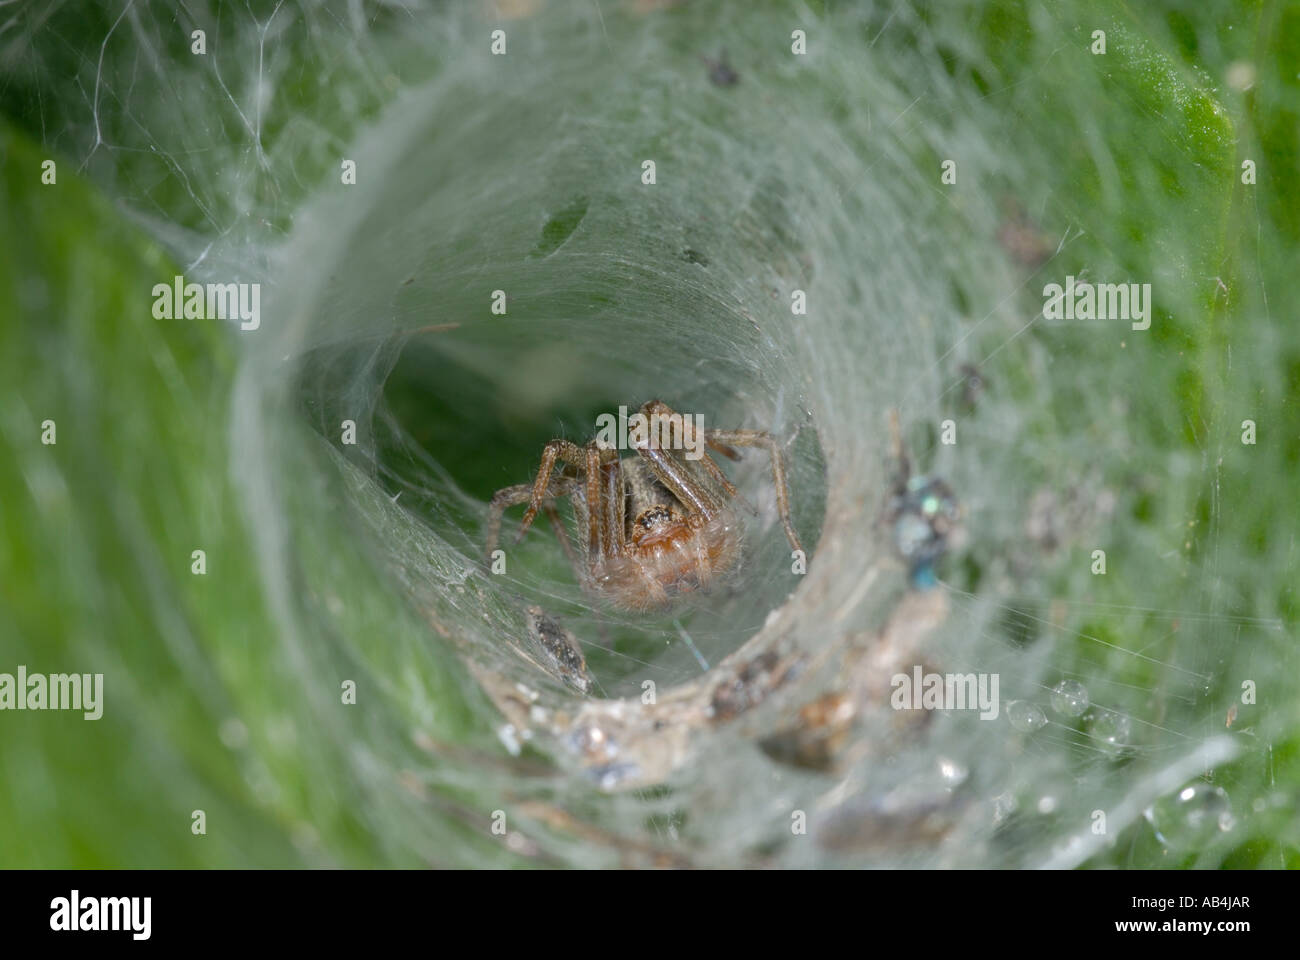 Spider in a funnel shaped web, Wales, UK Stock Photo